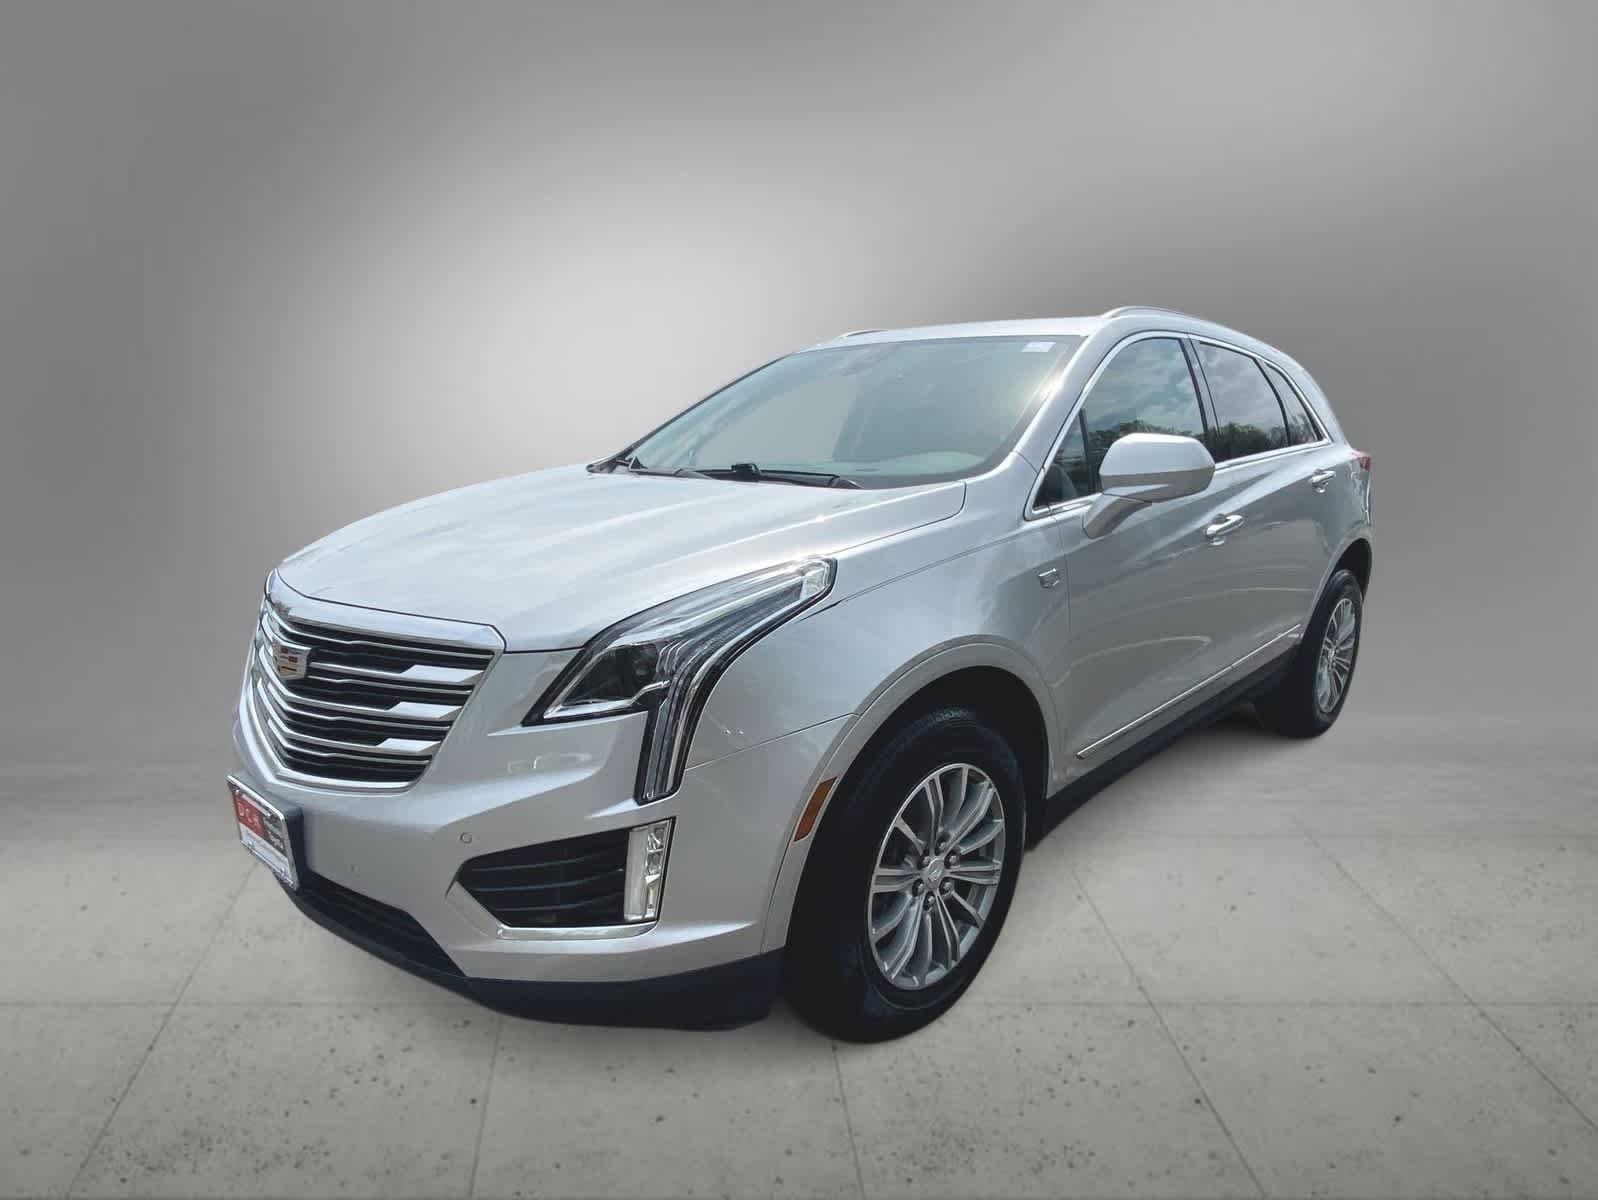 Used 2017 CADILLAC XT5 Luxury Radiant Silver For Sale | Freehold 